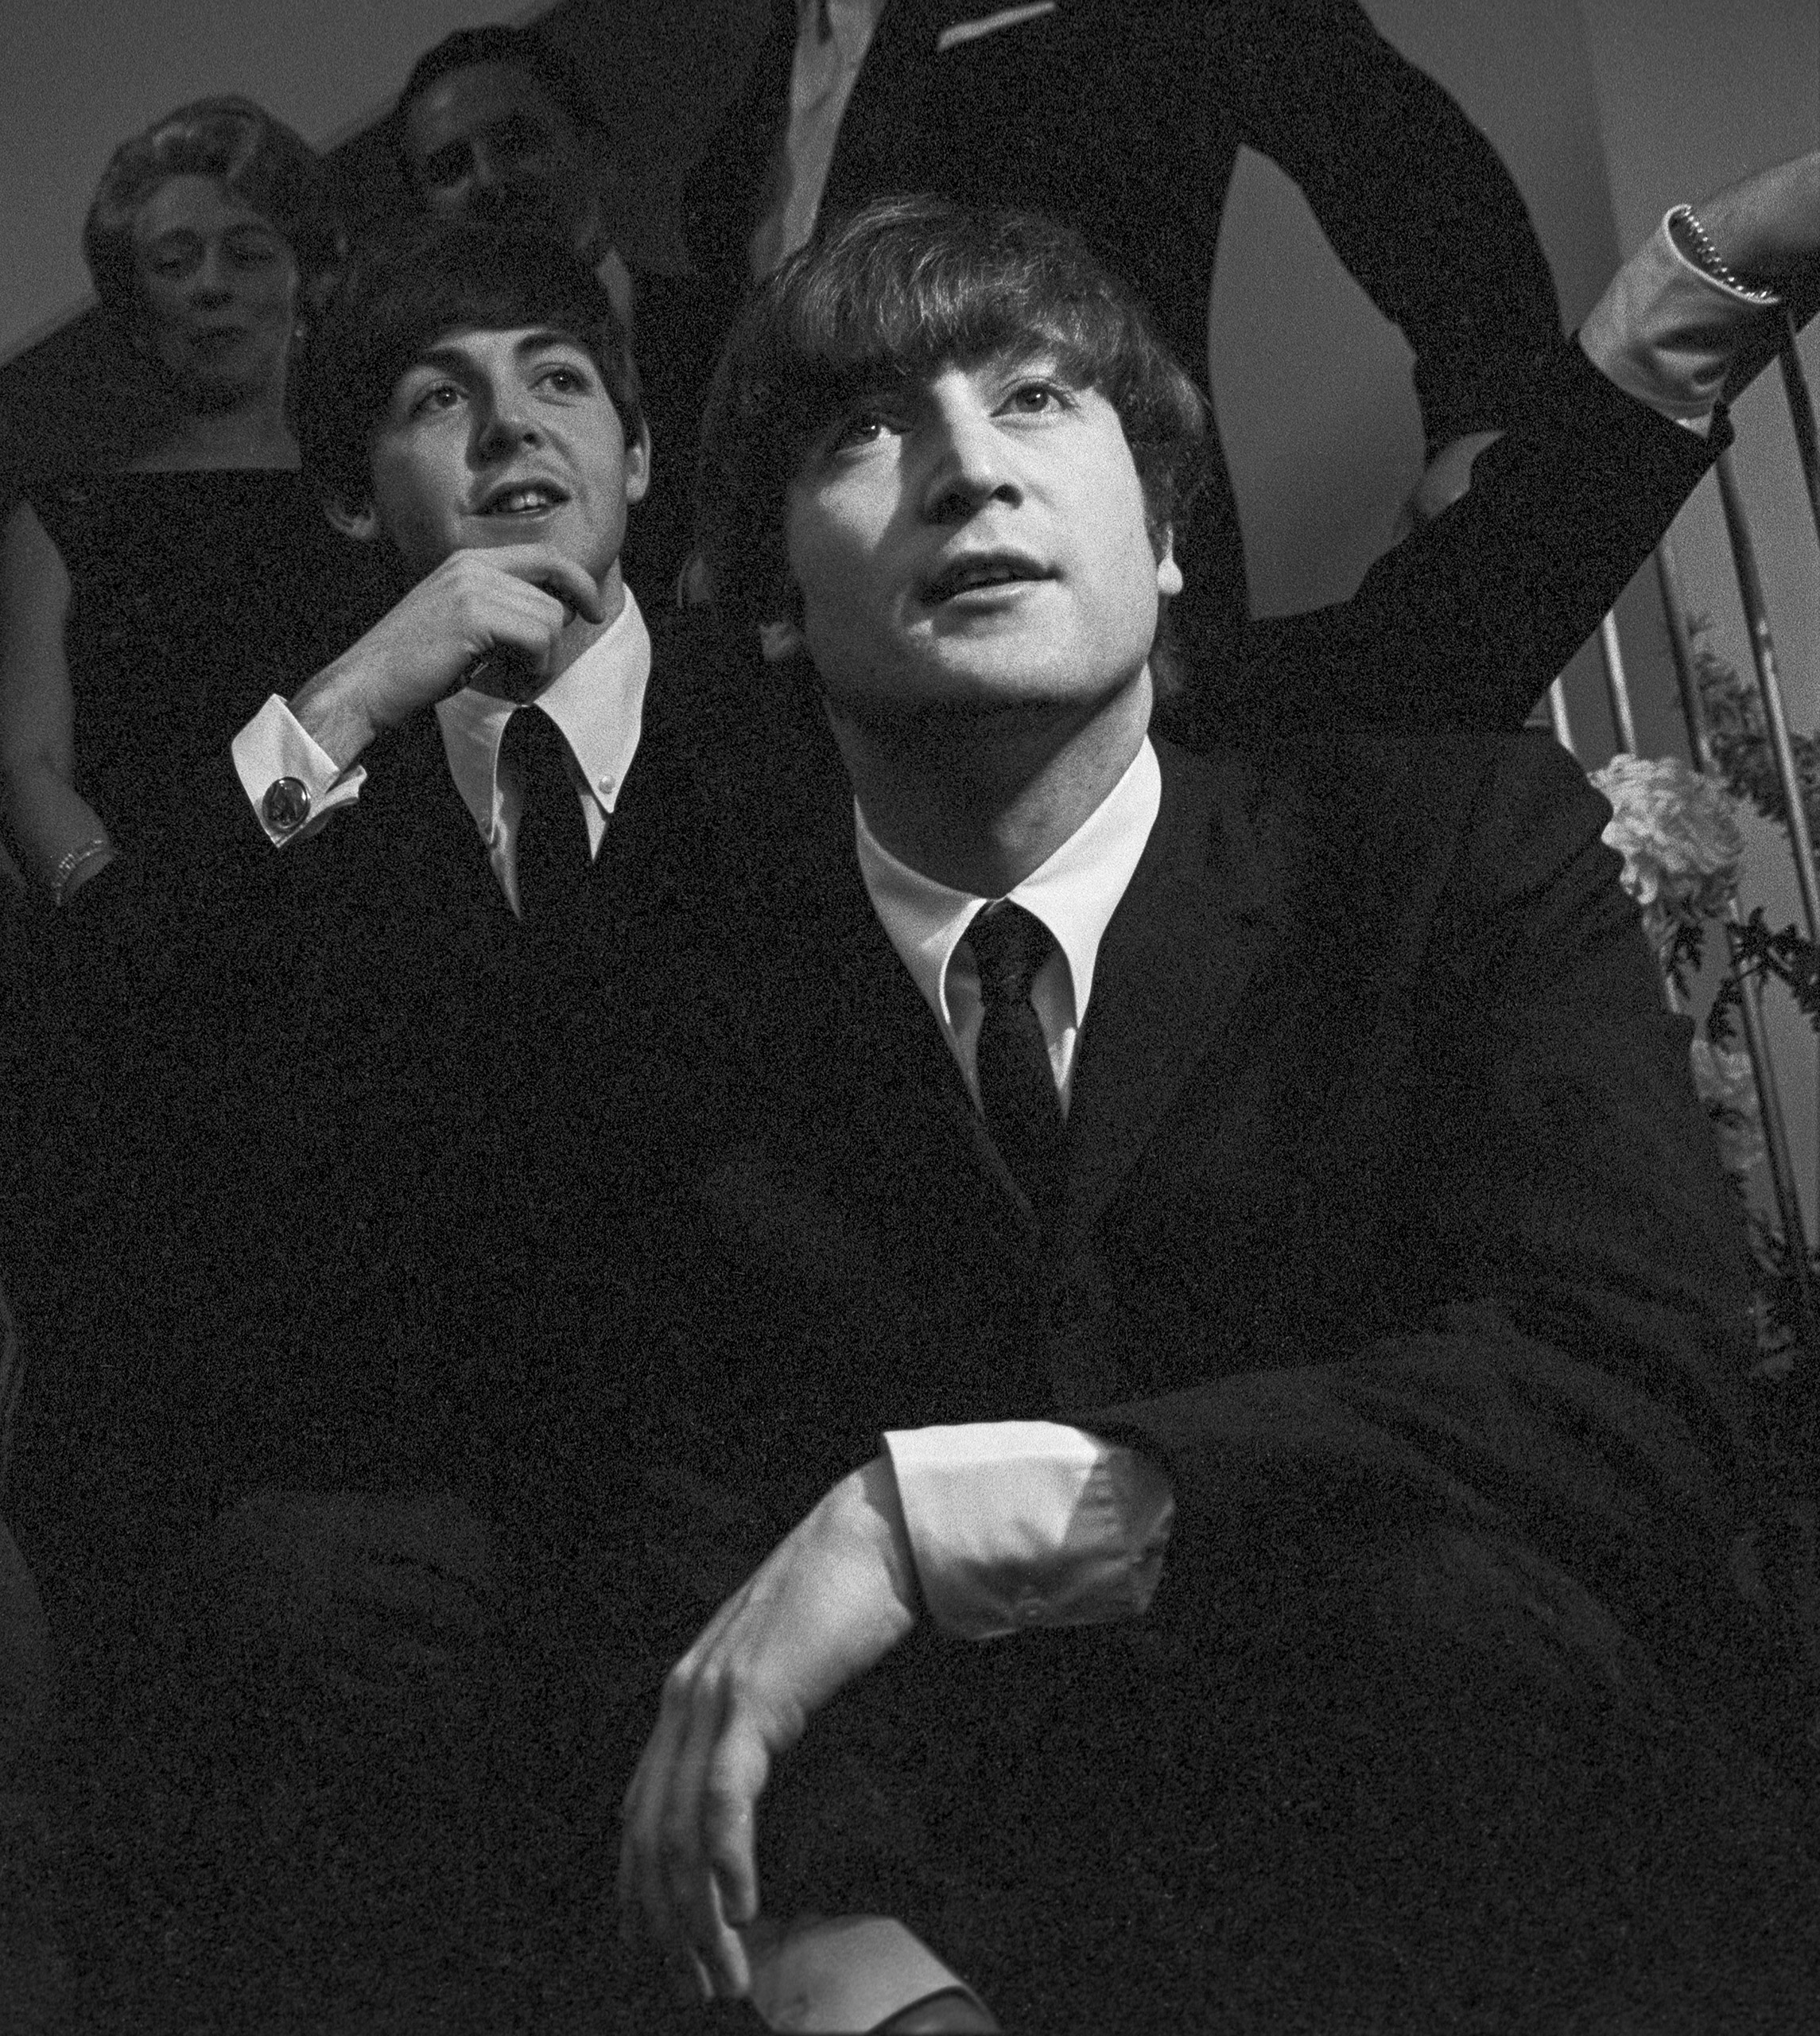 John Lennon and Paul McCartney at the British Embassy after their concert.